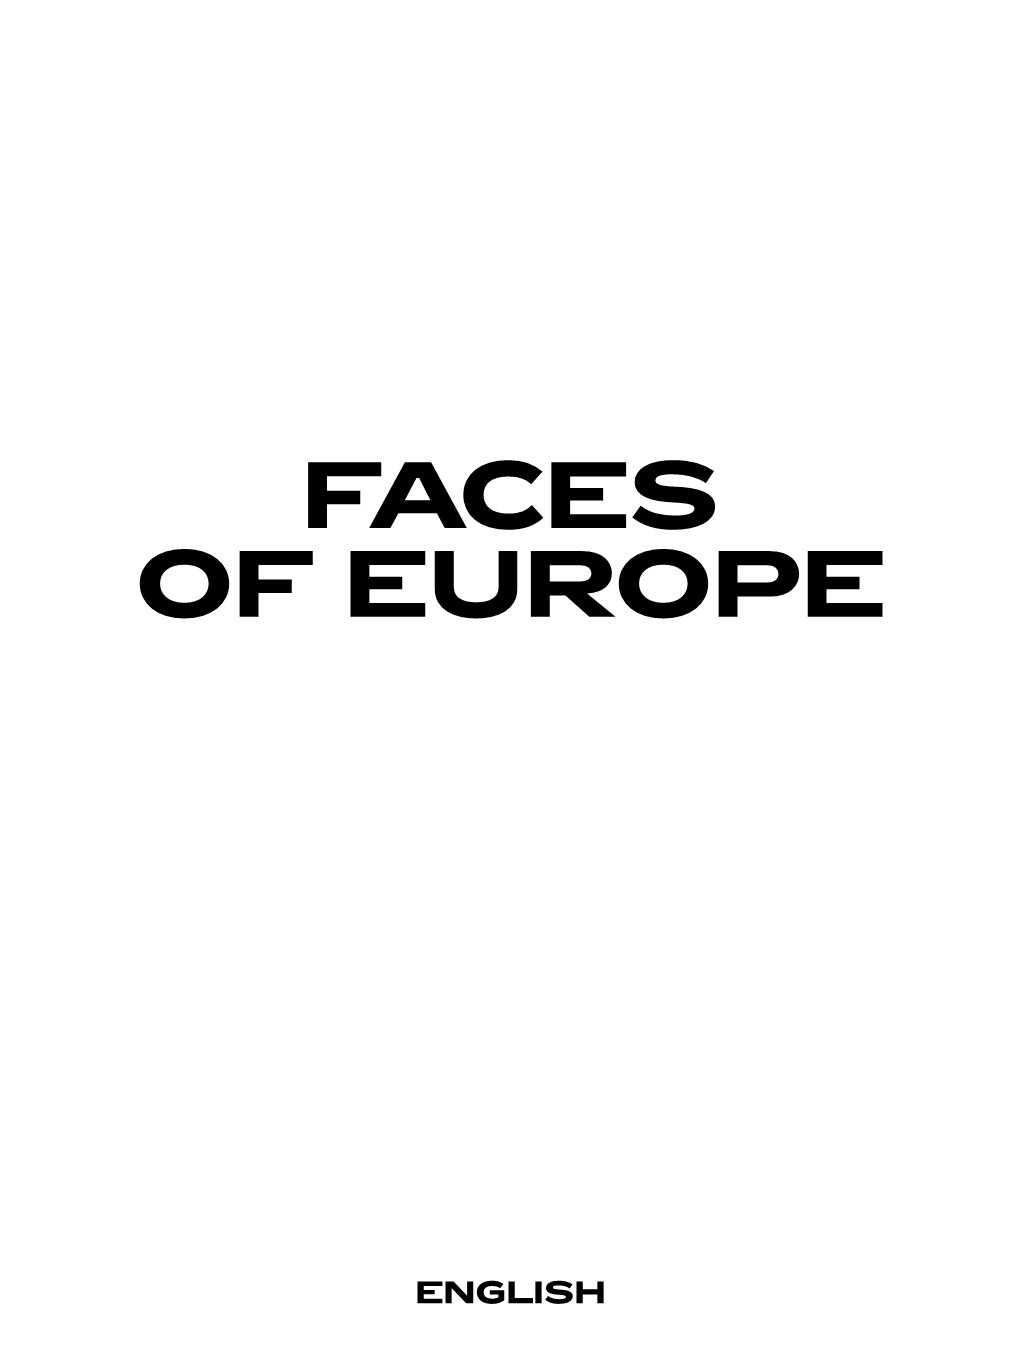 Faces of Europe